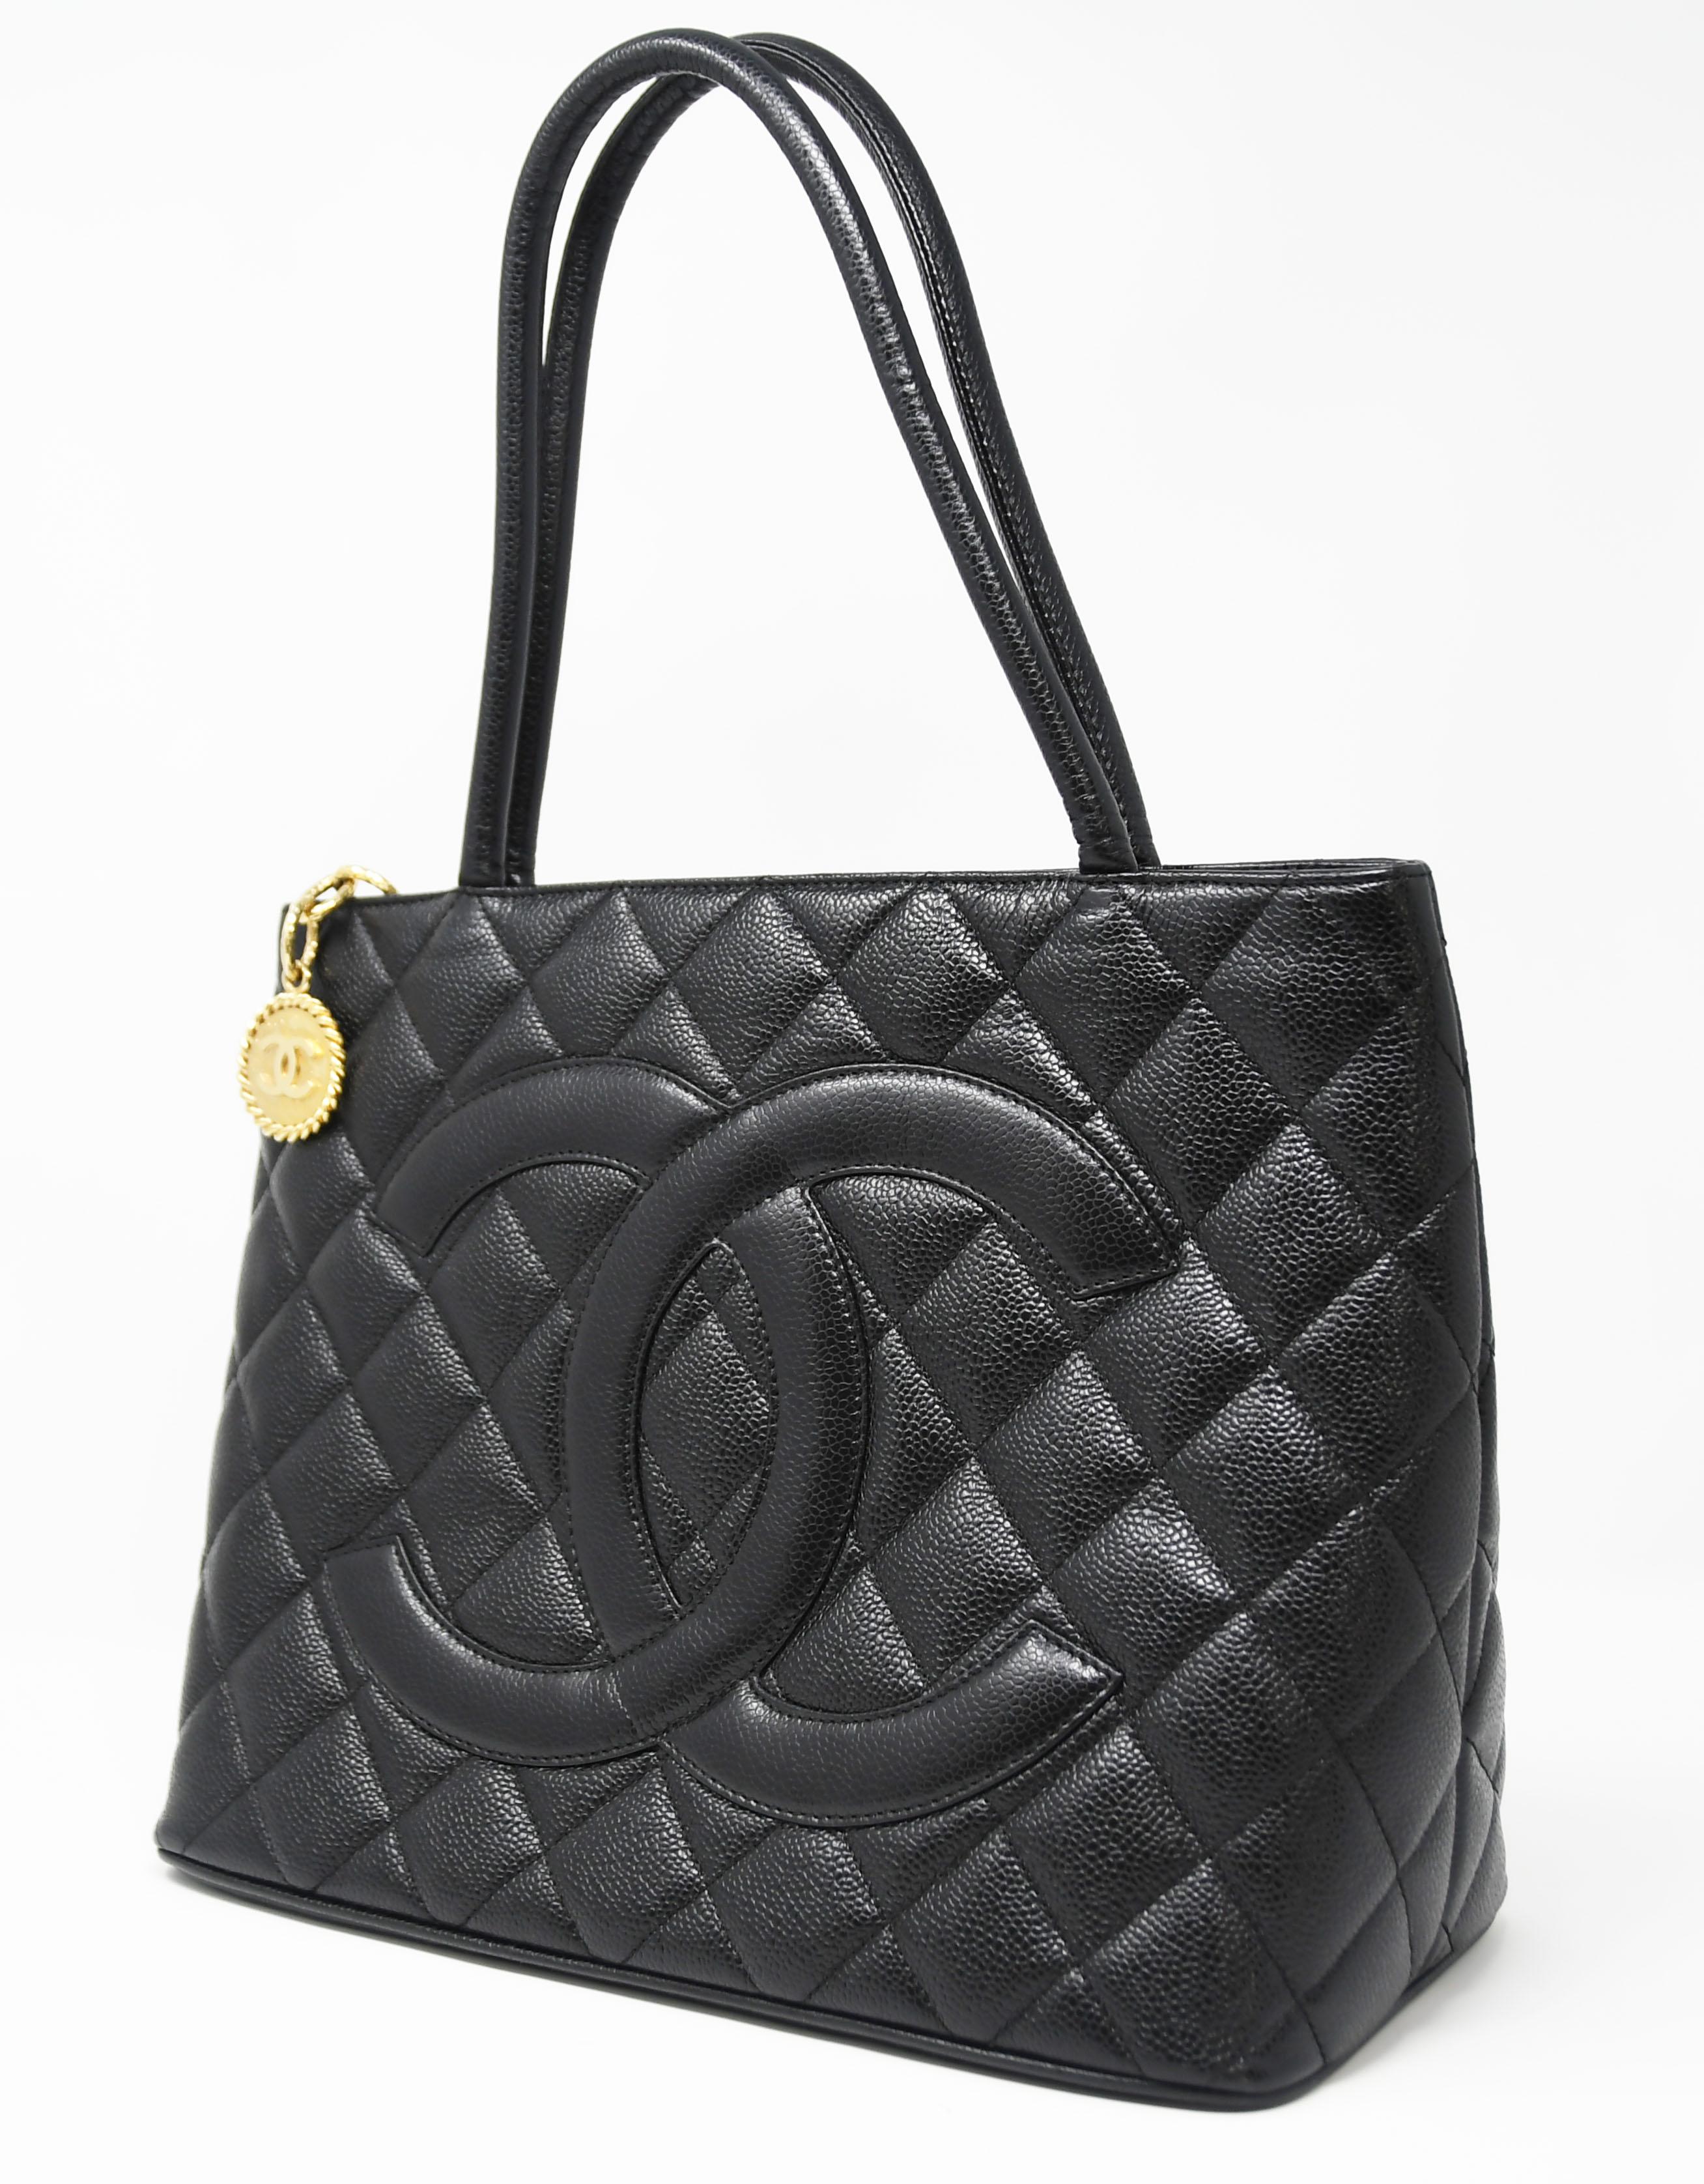 Black classic caviar top handle bag with gold medallion zipper.  Features quilted caviar leather with large 